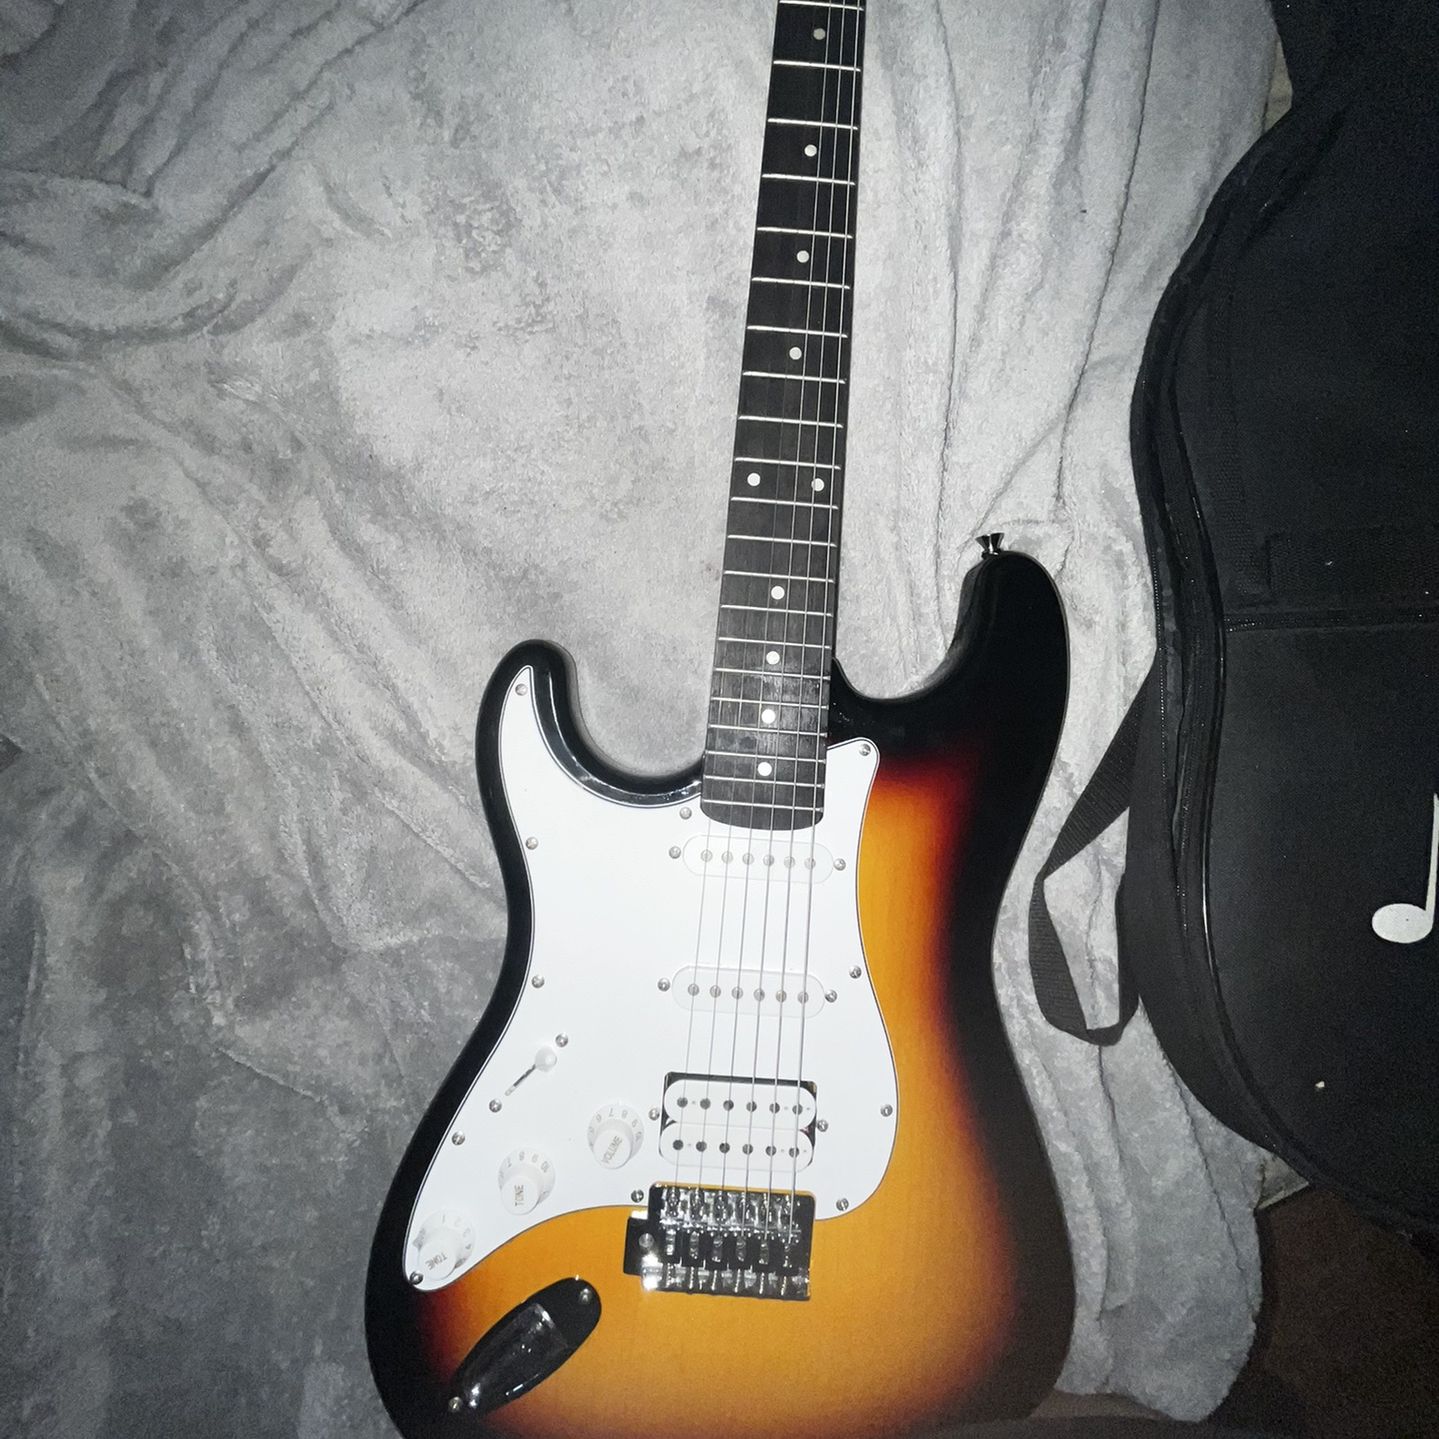 DONNER DST-100 FULL SIZE ELECTRIC GUITAR 